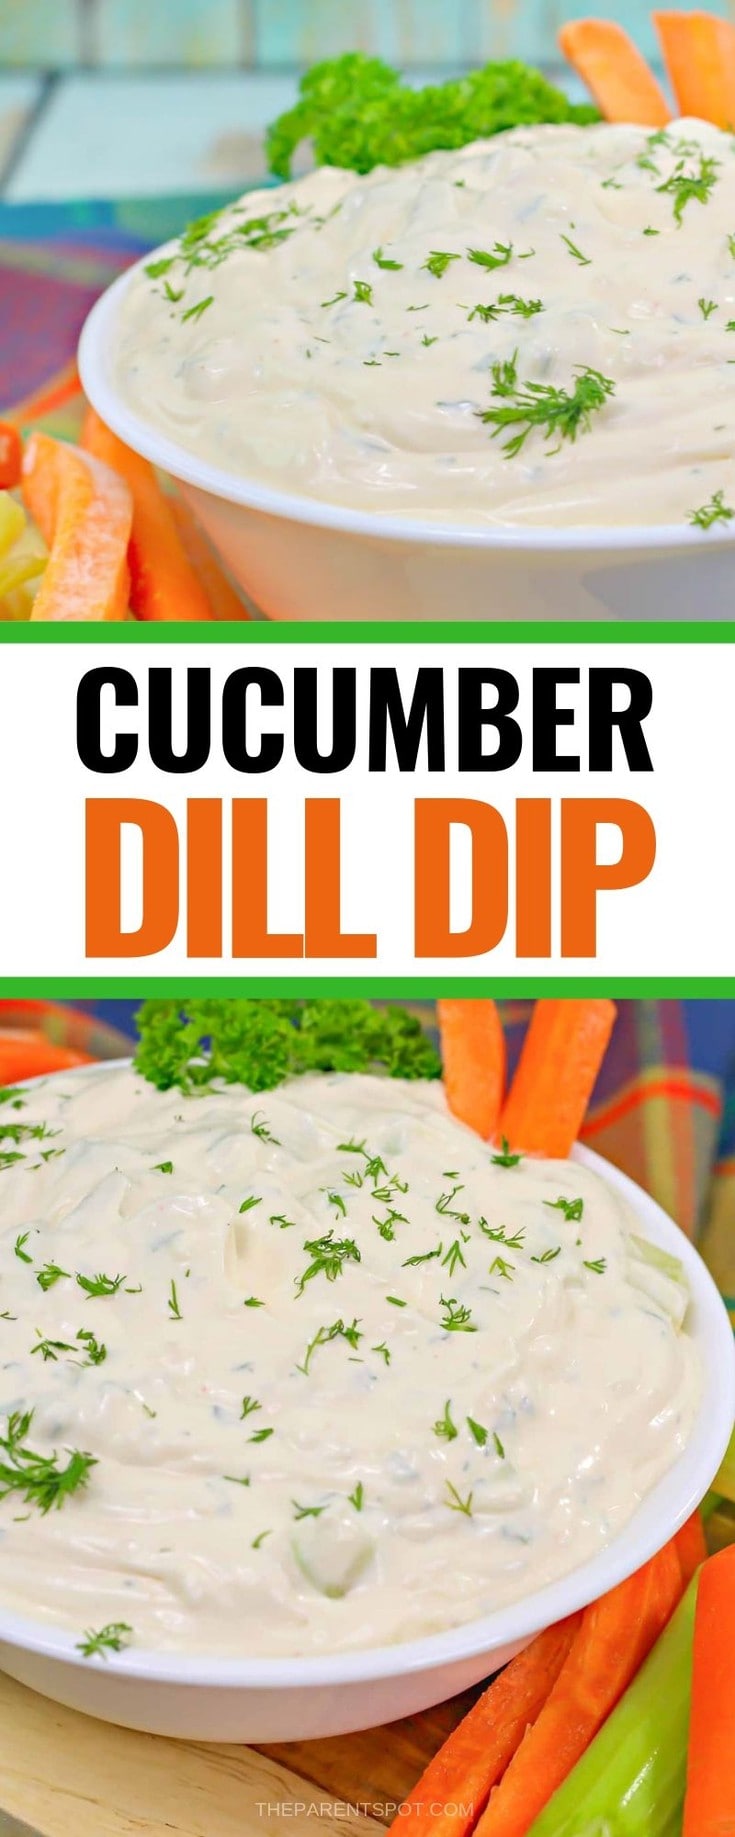 Cucumber dill dip with cream cheese and mayo